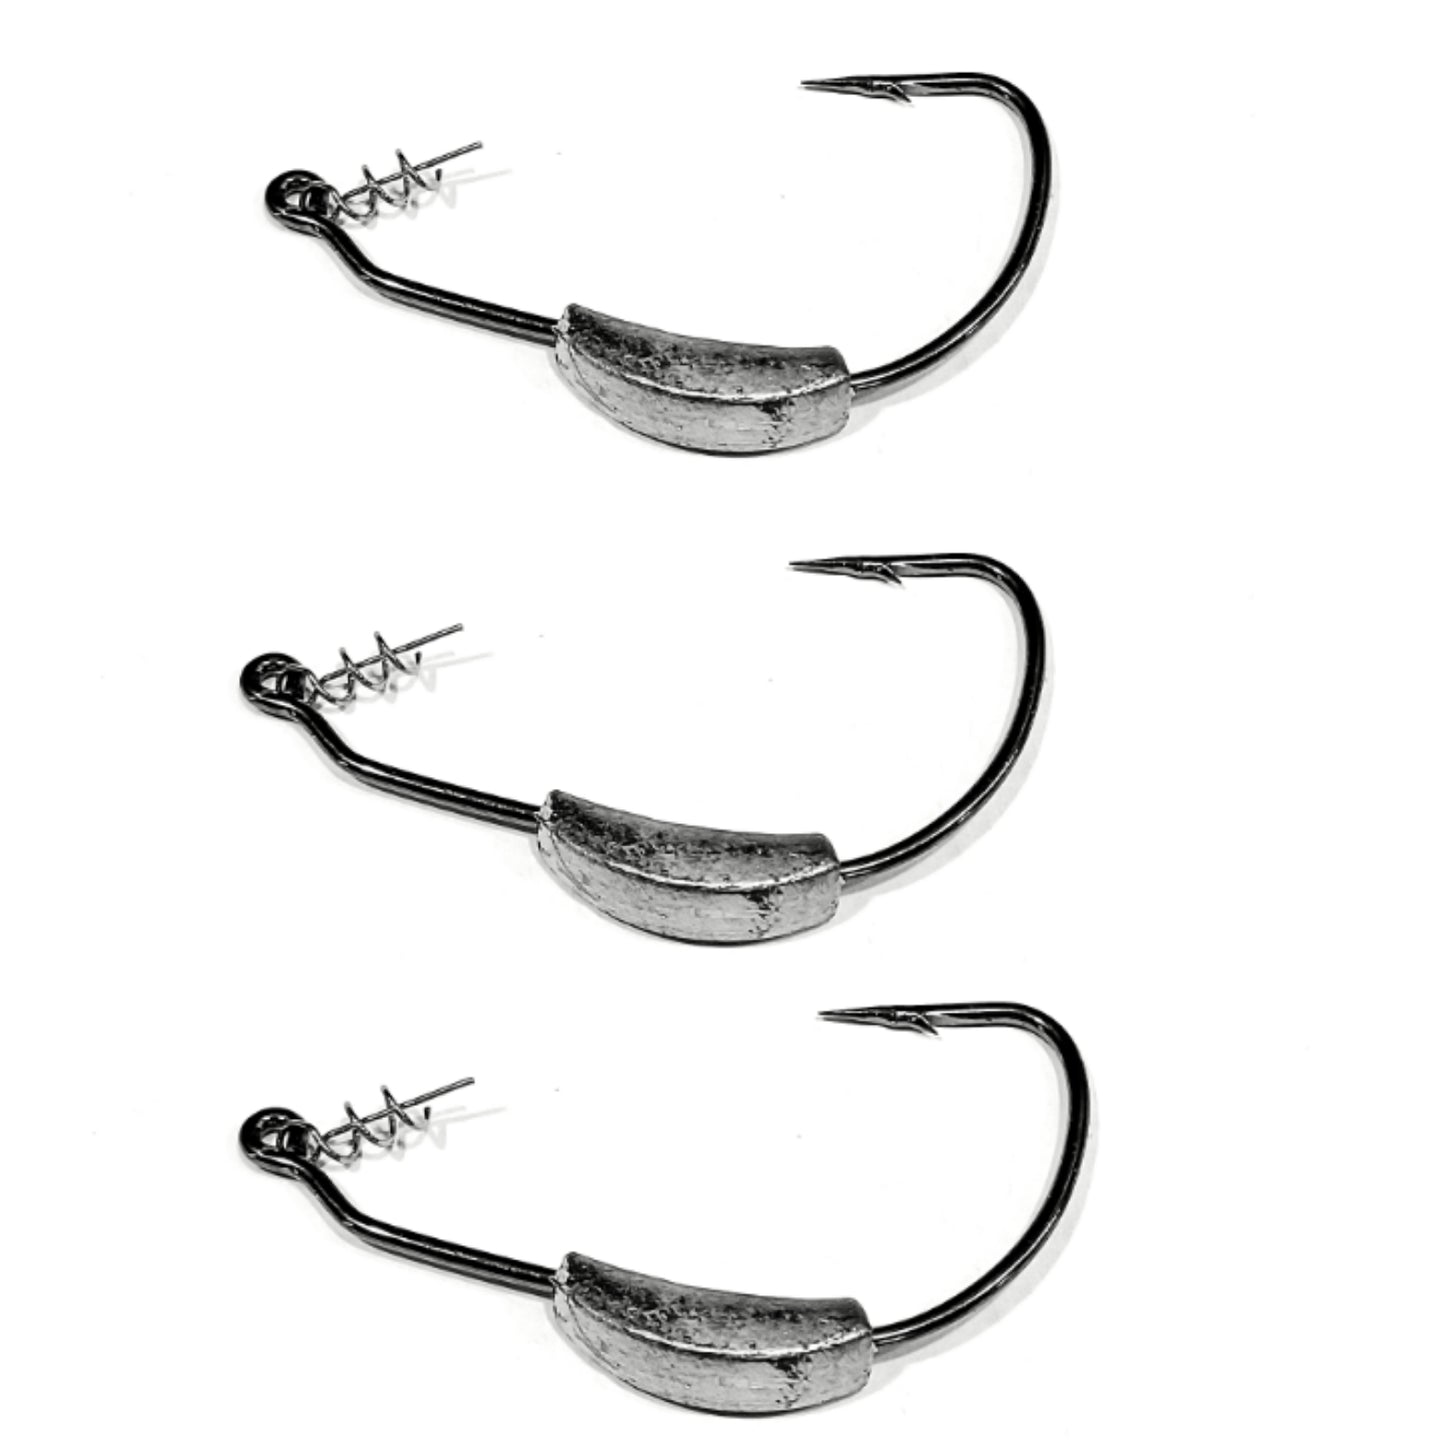 WEIGHTED 1/4oz extra wide gap weedless heavy gauge hooks with spring lock  bait keeper (Bass Fishing -Swimbaits-Creature Baits-Grubs)